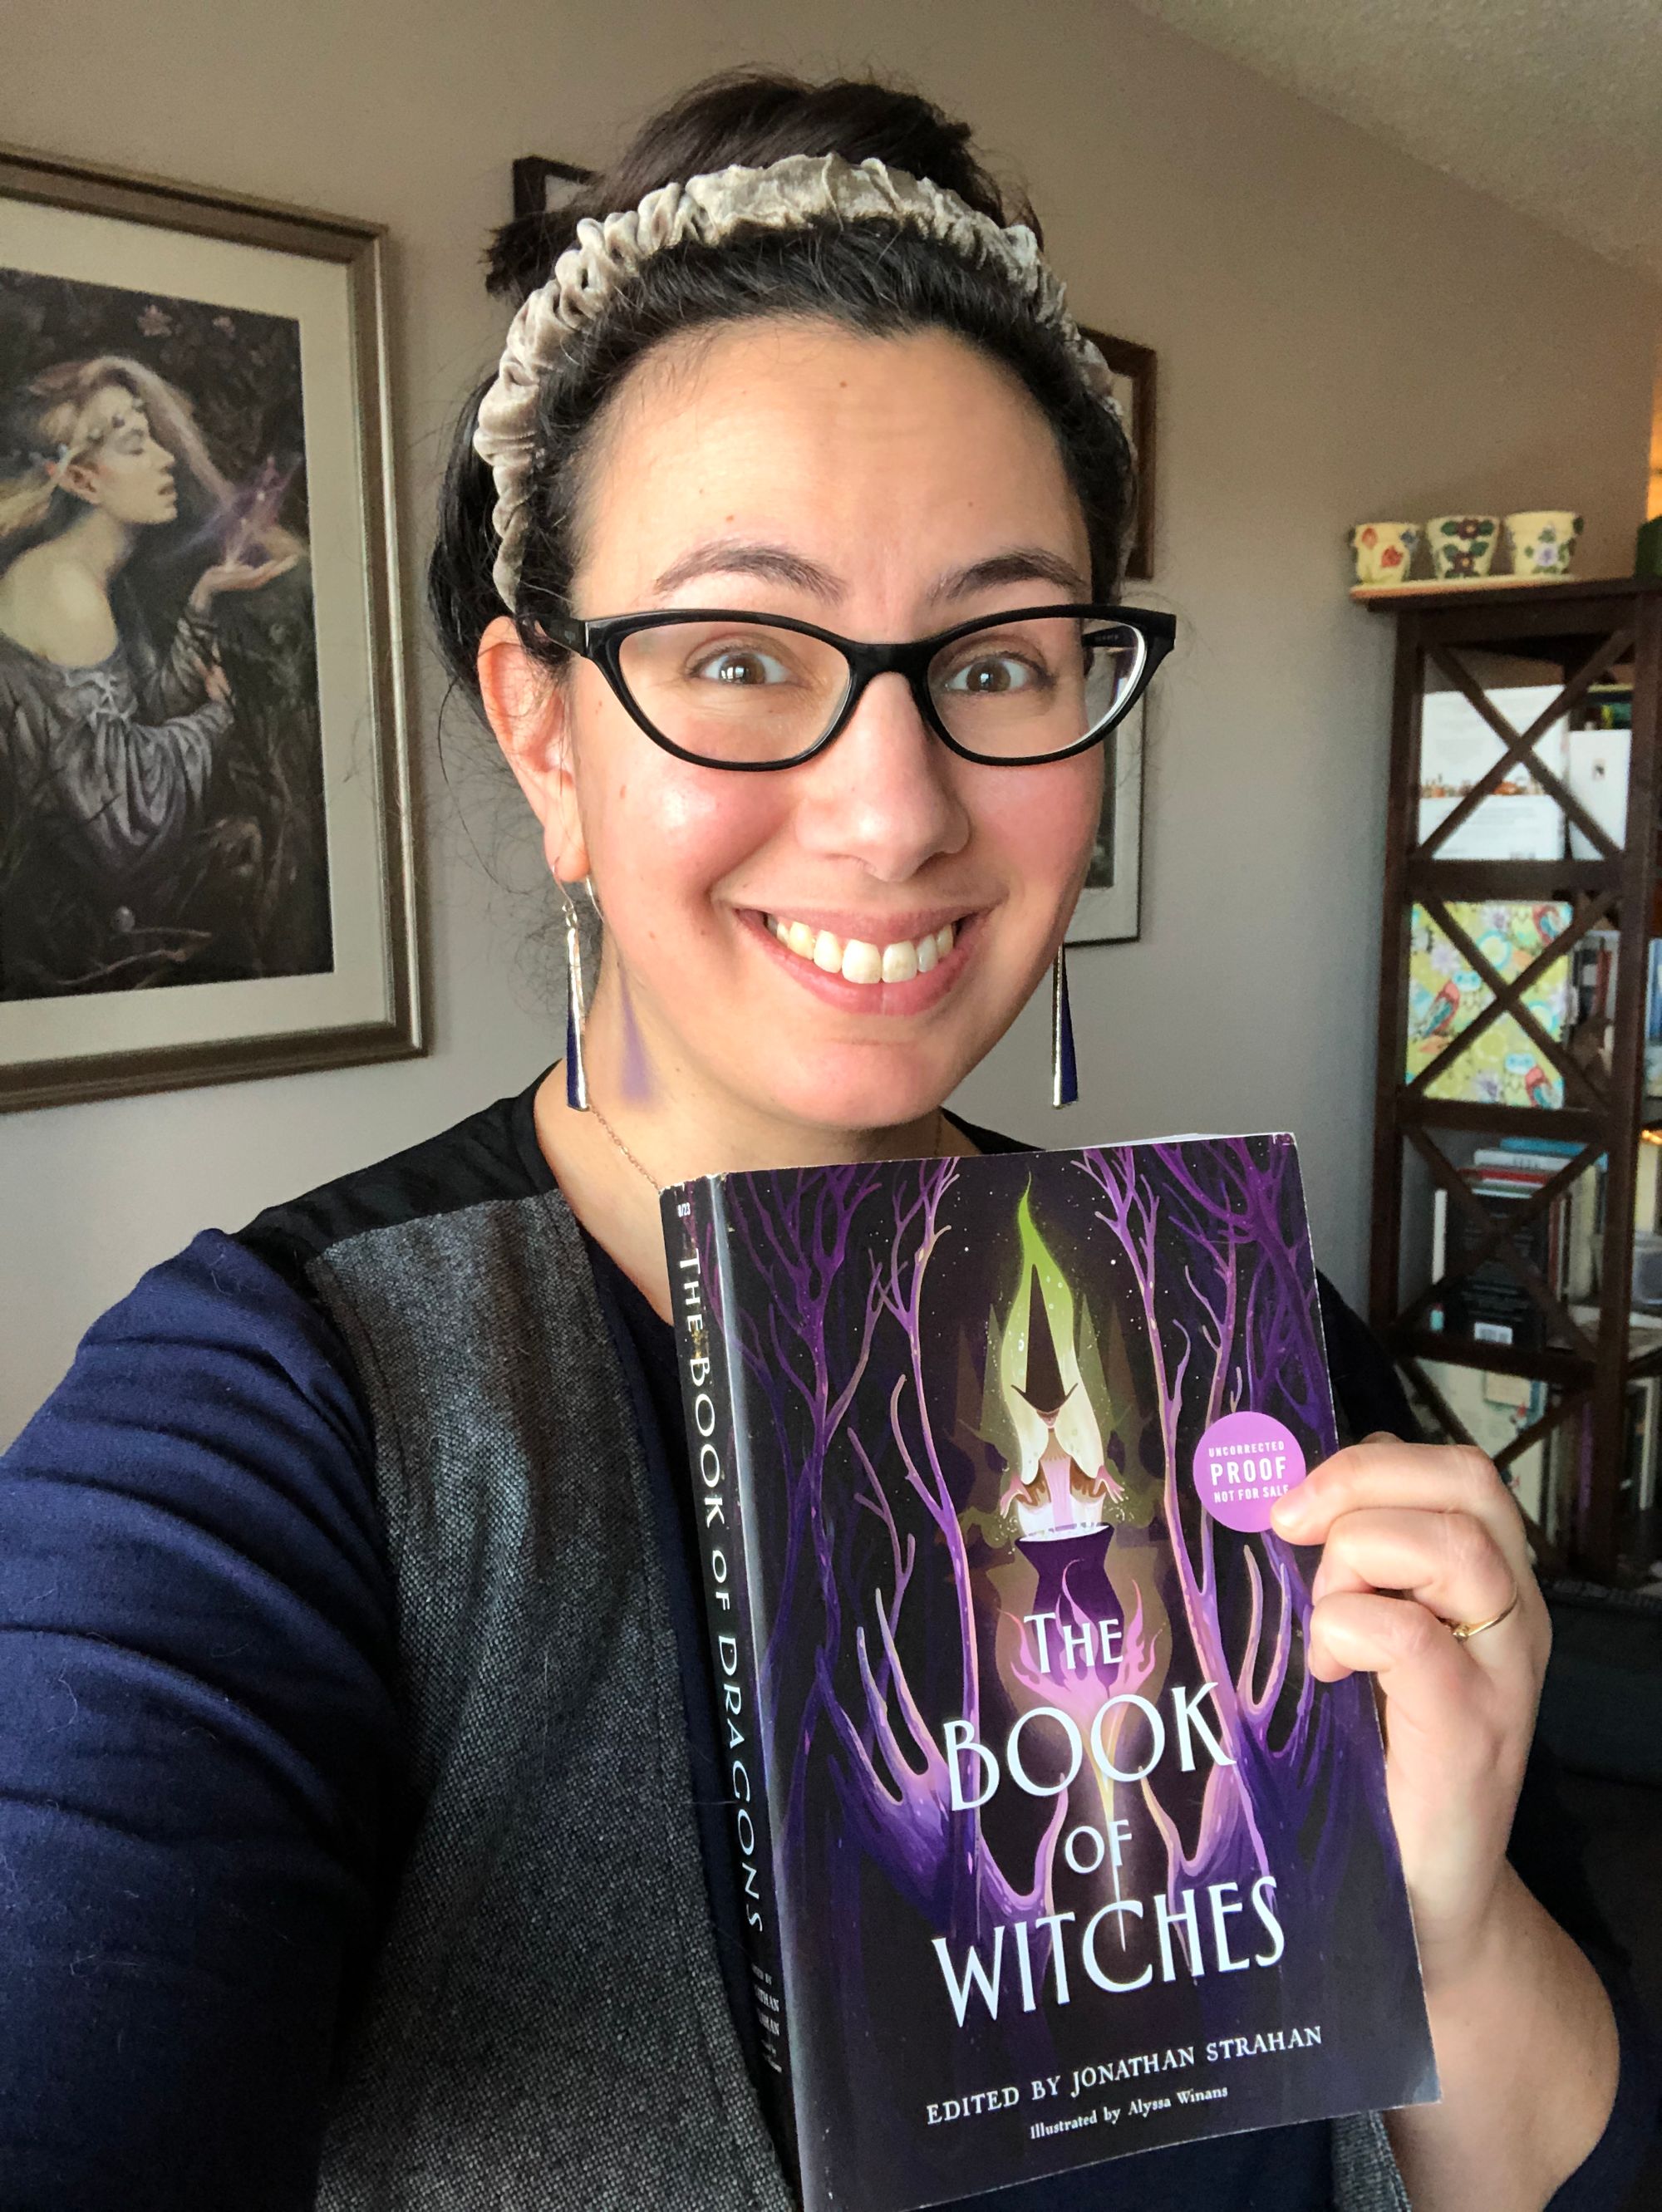 Selfie in which I'm holding up my advanced reading copy of THE BOOK OF WITCHES while grinning widely. 